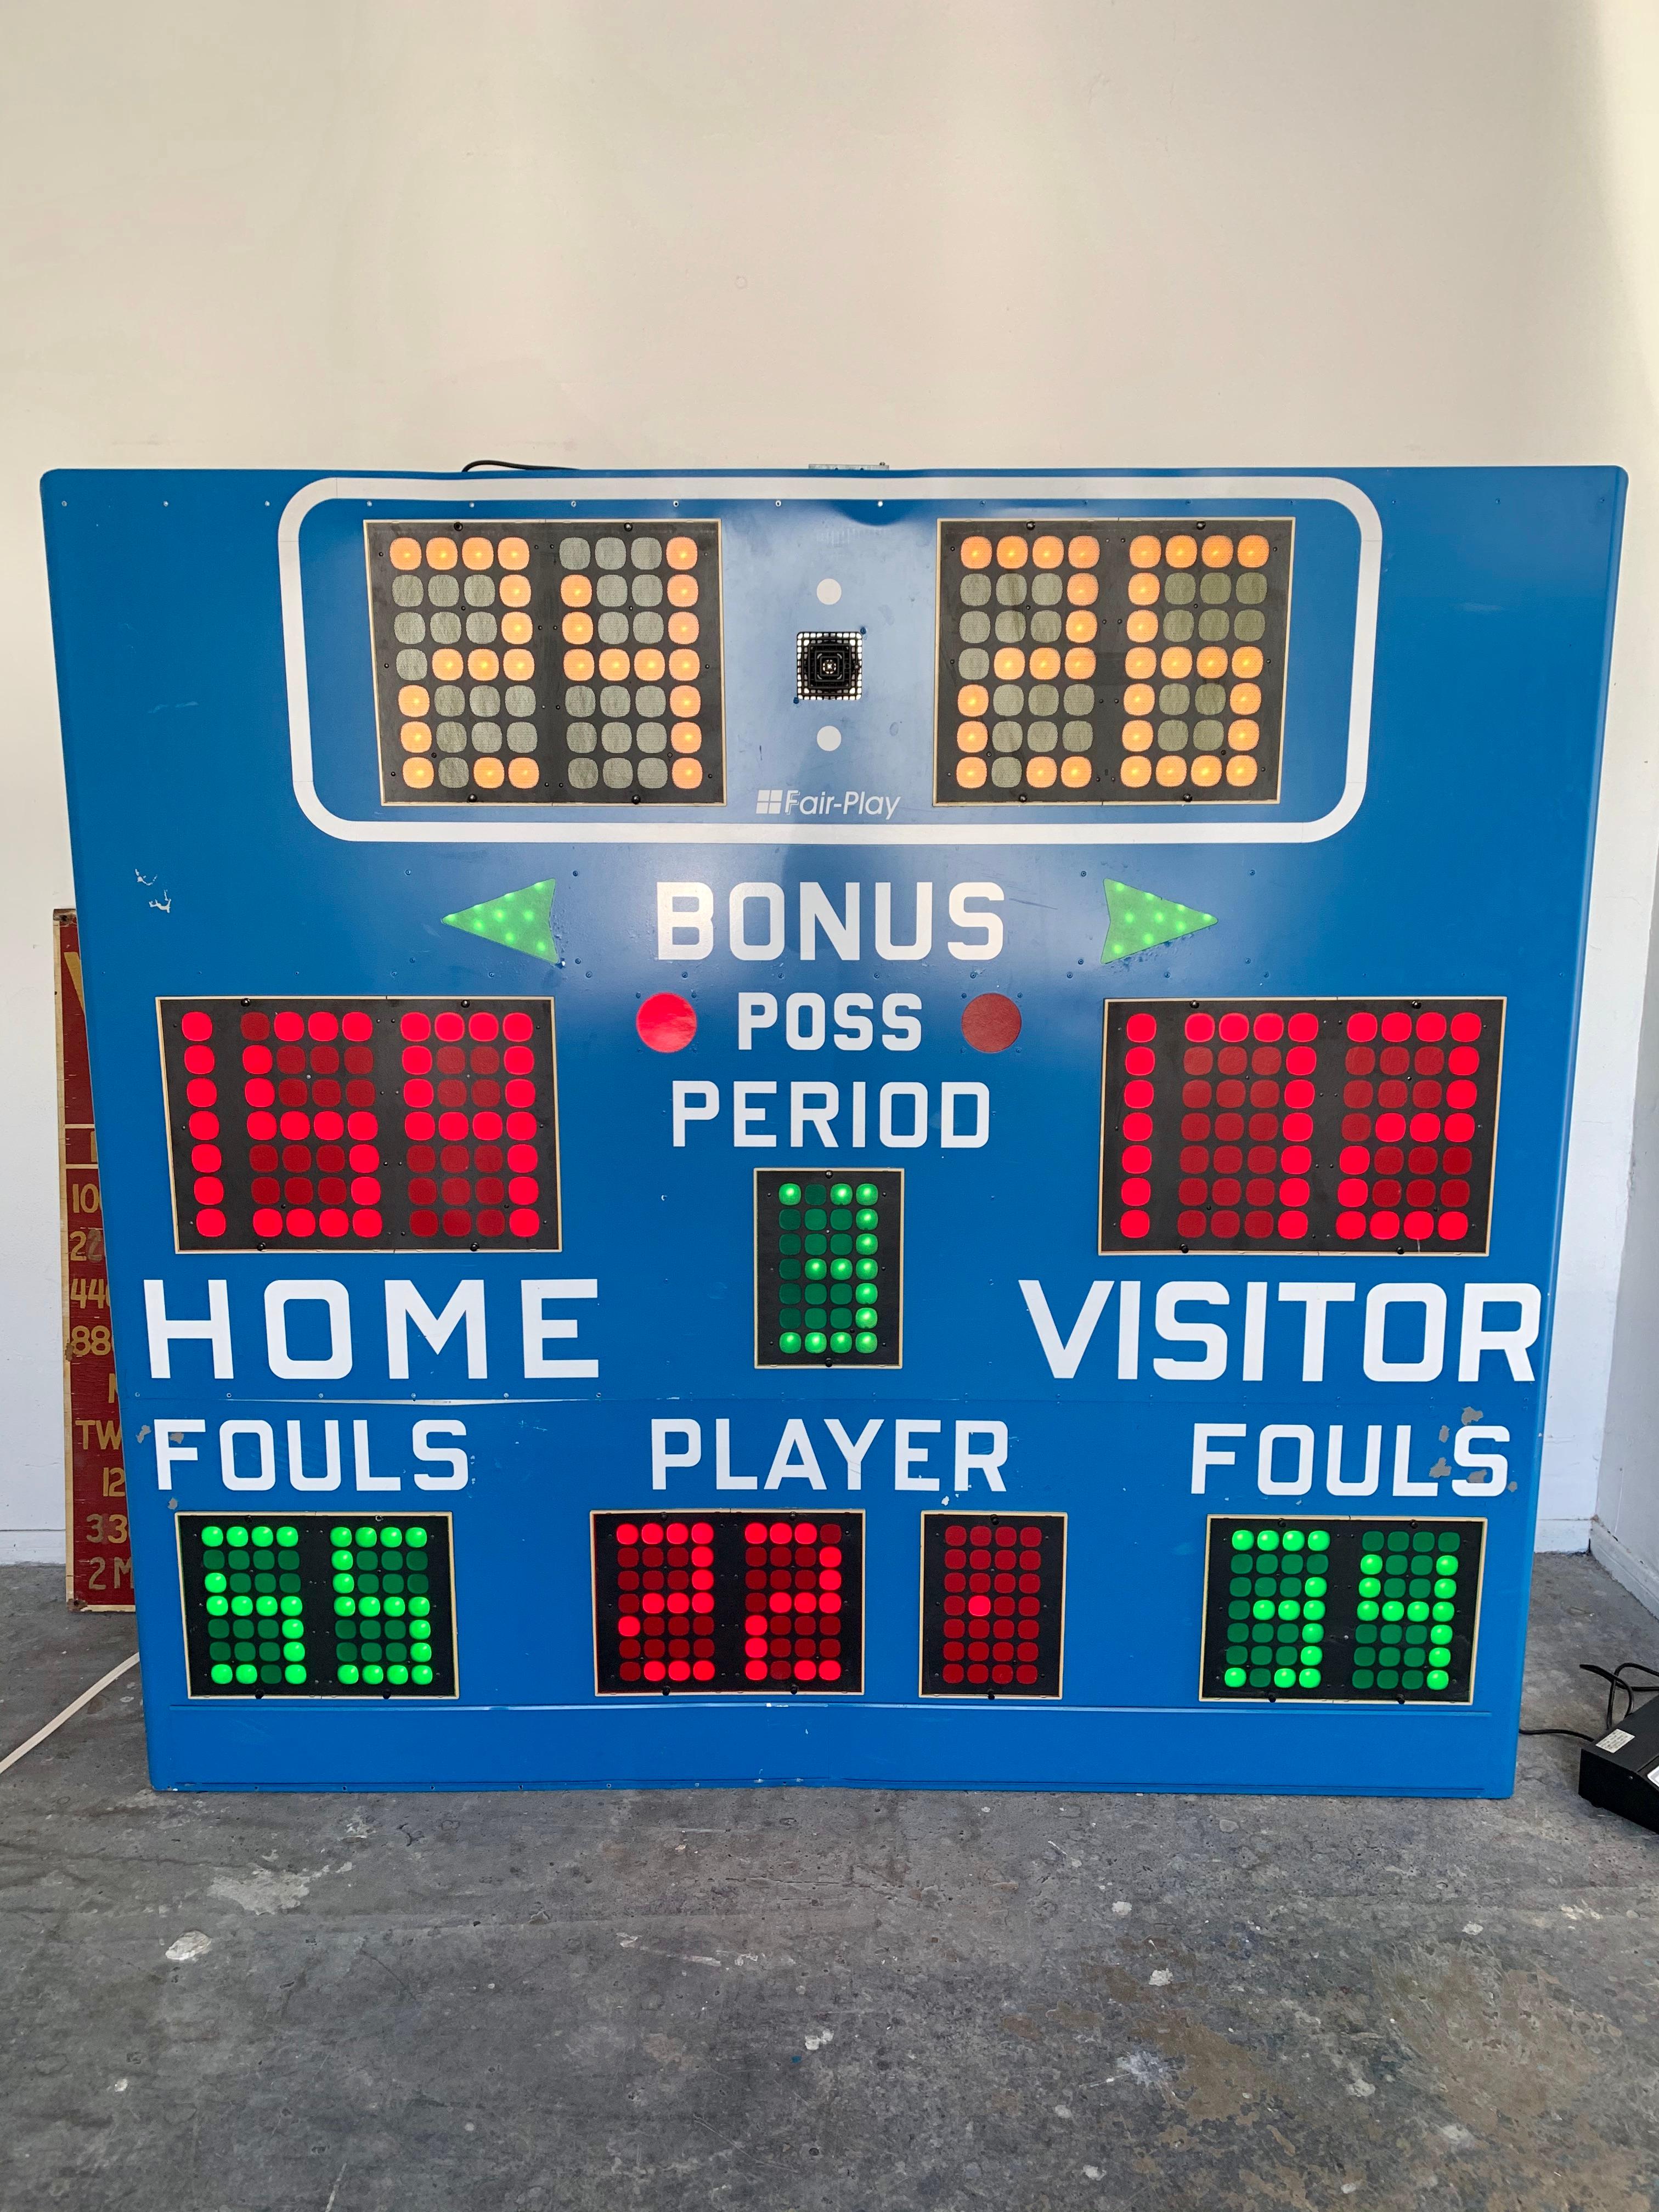 Vintage basketball scoreboards by Fair Play, made in the 1970s. In working order with controller to adjust score, running shot clock etc. and working horn. Very fun piece of art for your home or commercial space. Taken down from a school gymnasium.